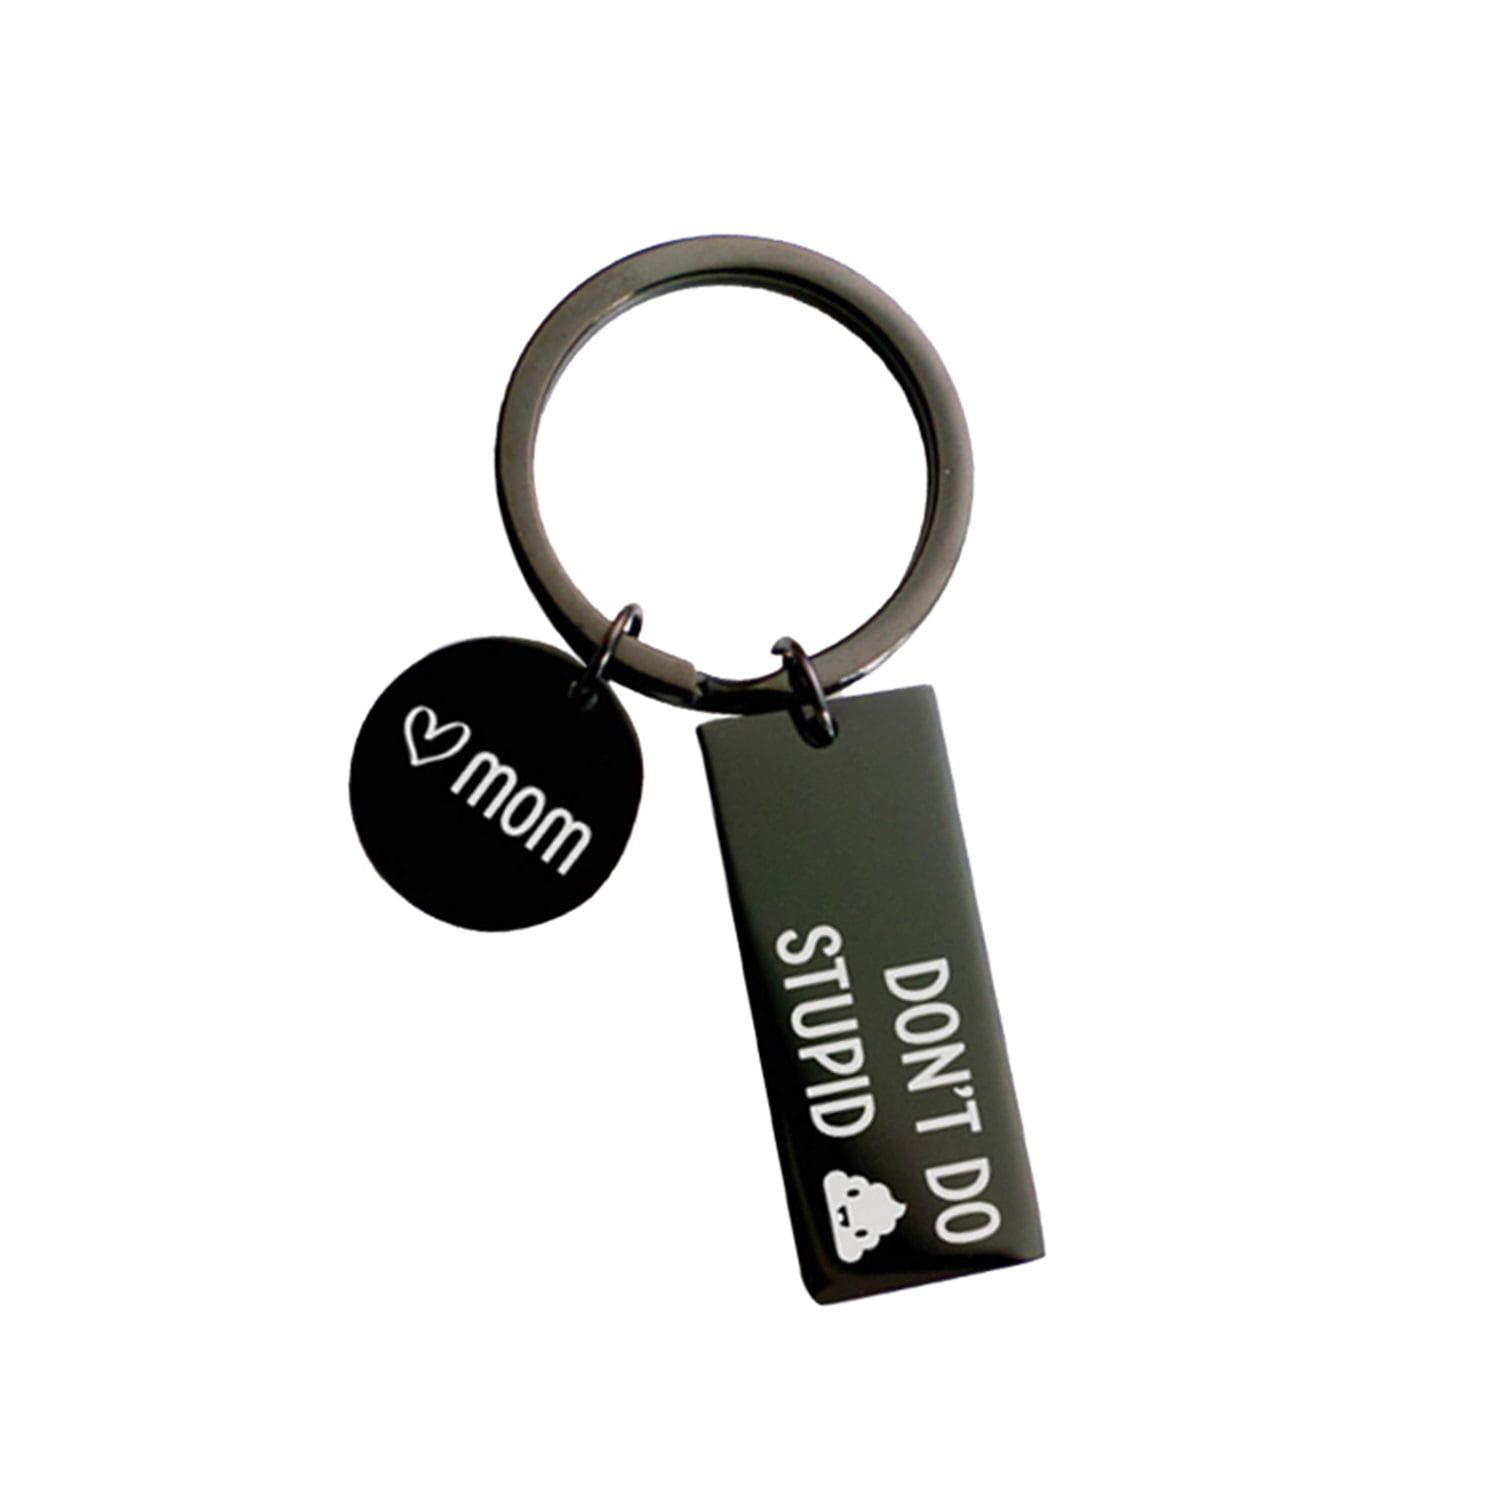 A Special Daughter Celebrity Style World's Best Keyring 